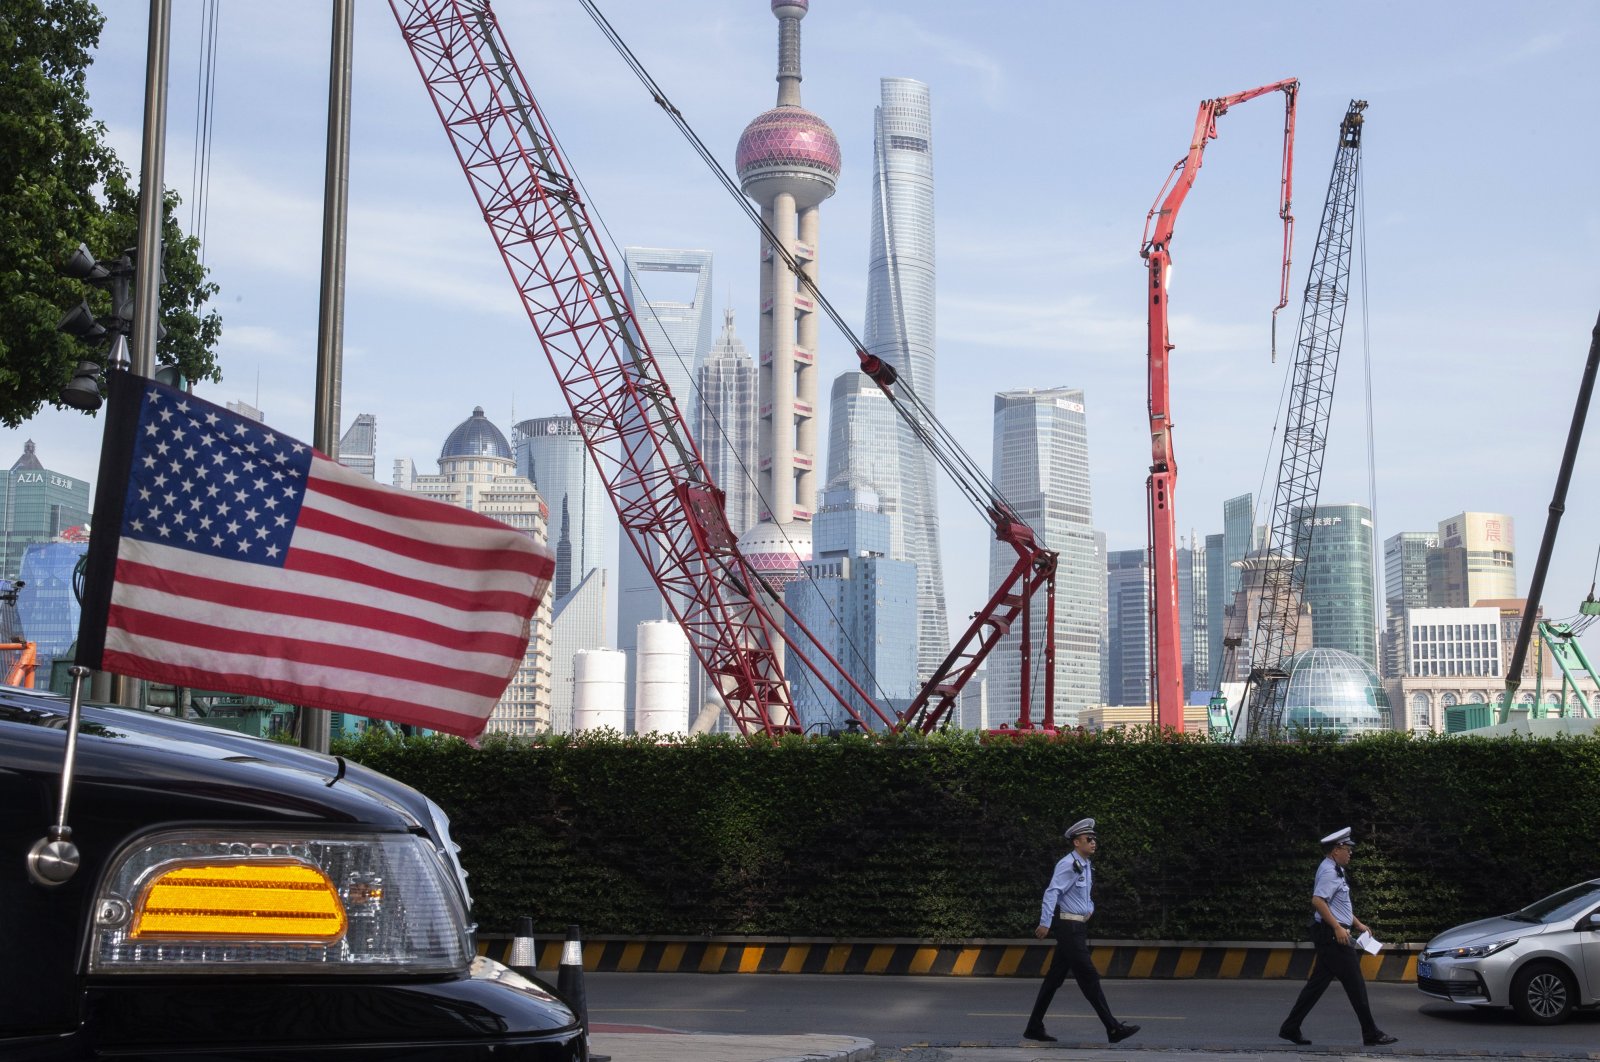 Chinese police officers walk by a U.S. flag on an embassy car outside a hotel in Shanghai, China, July 30, 2019. (AP Photo)